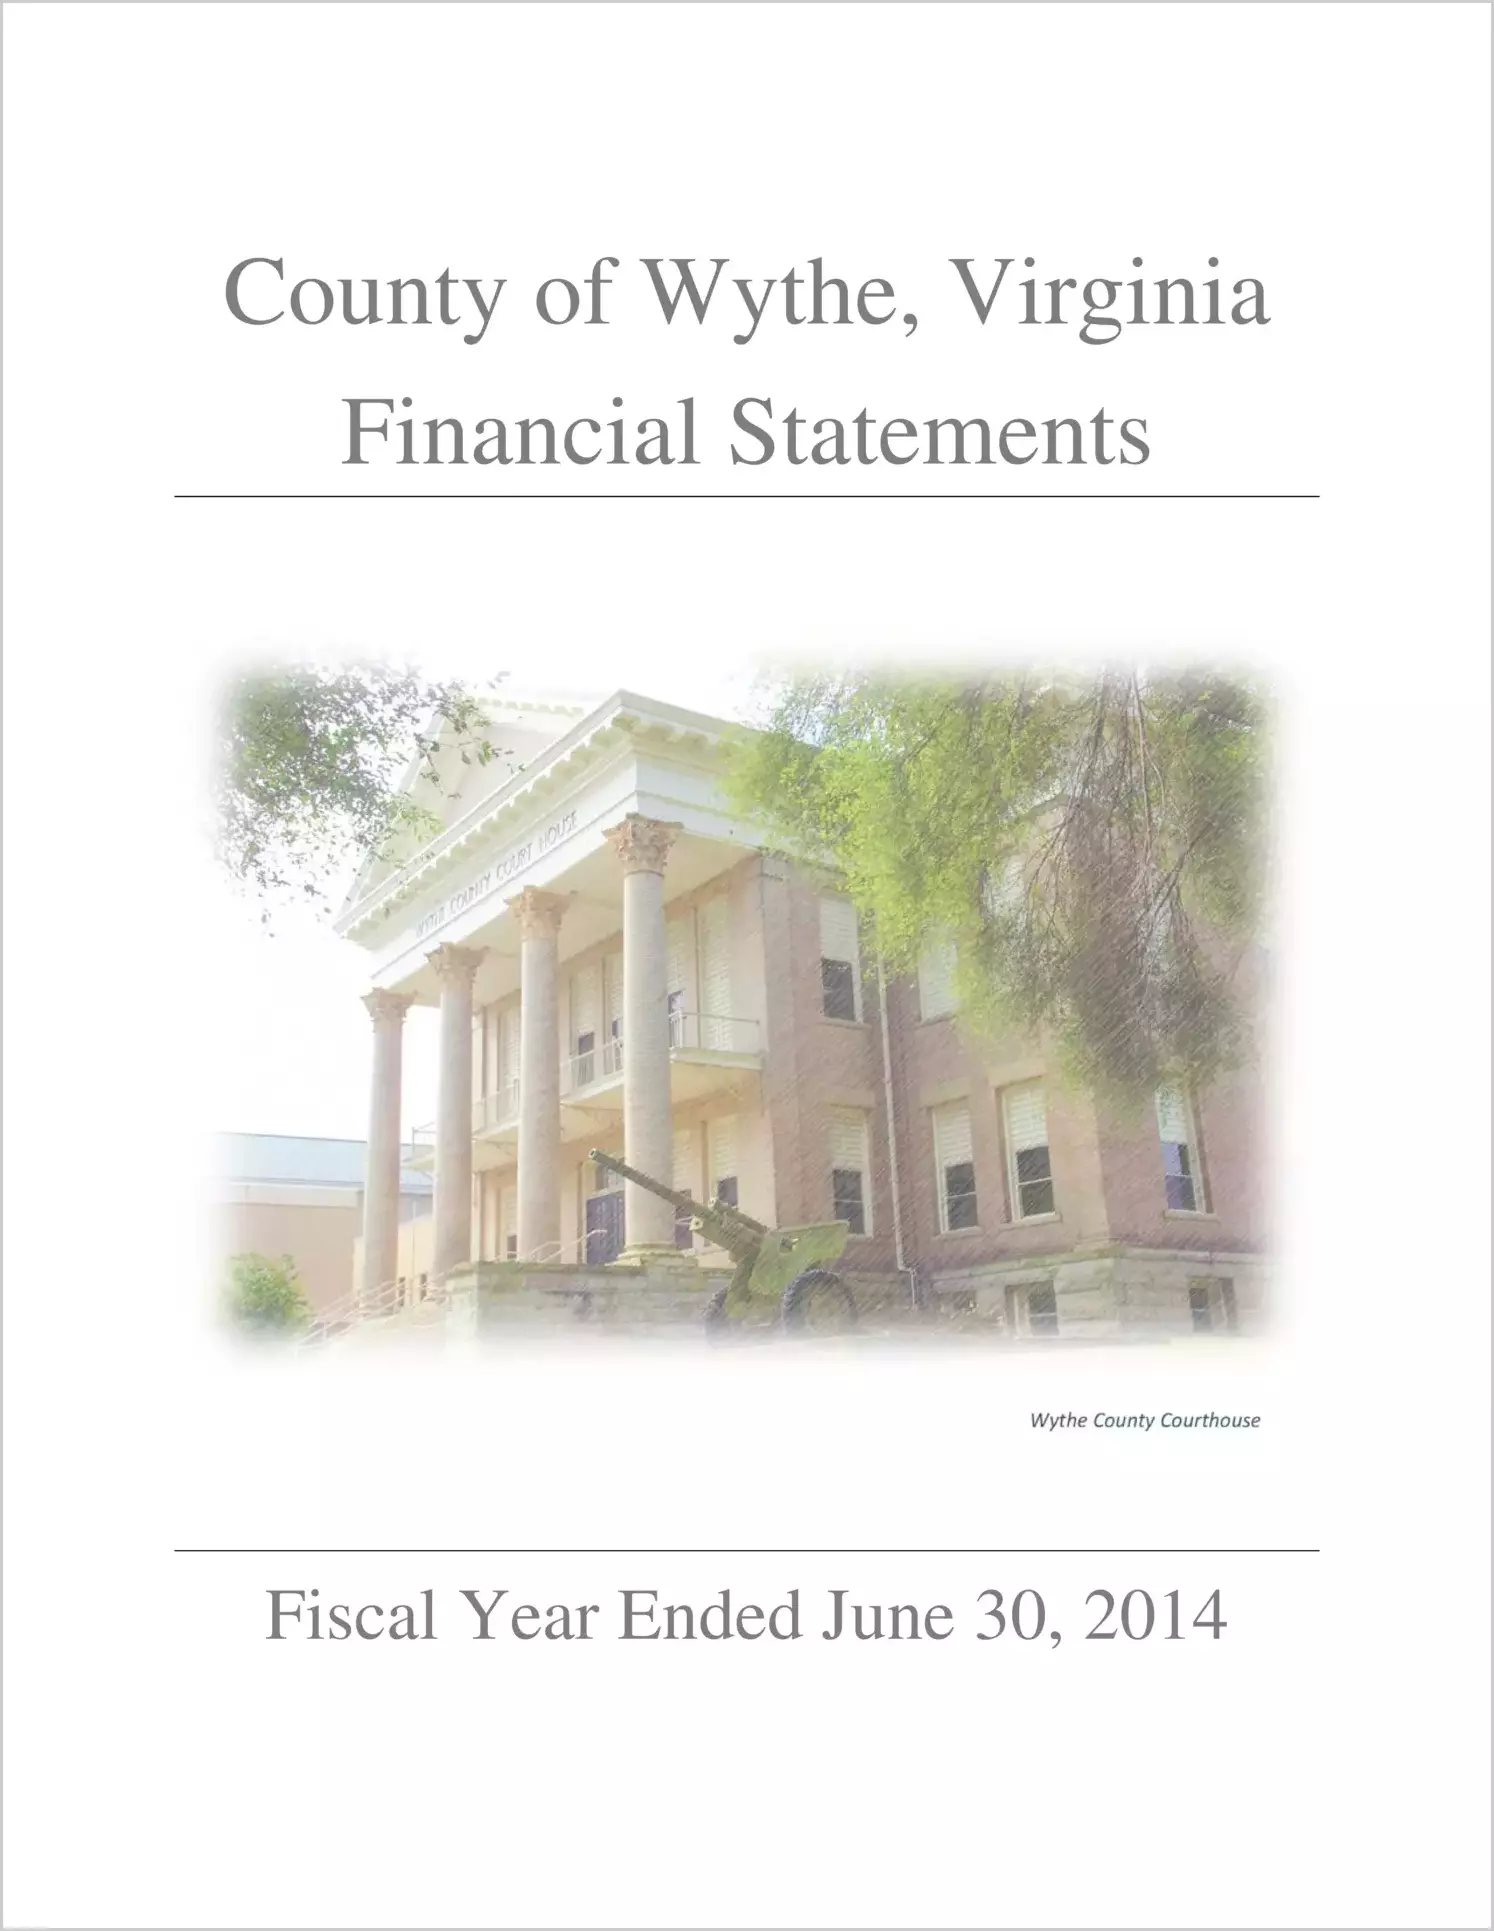 2014 Annual Financial Report for County of Wythe